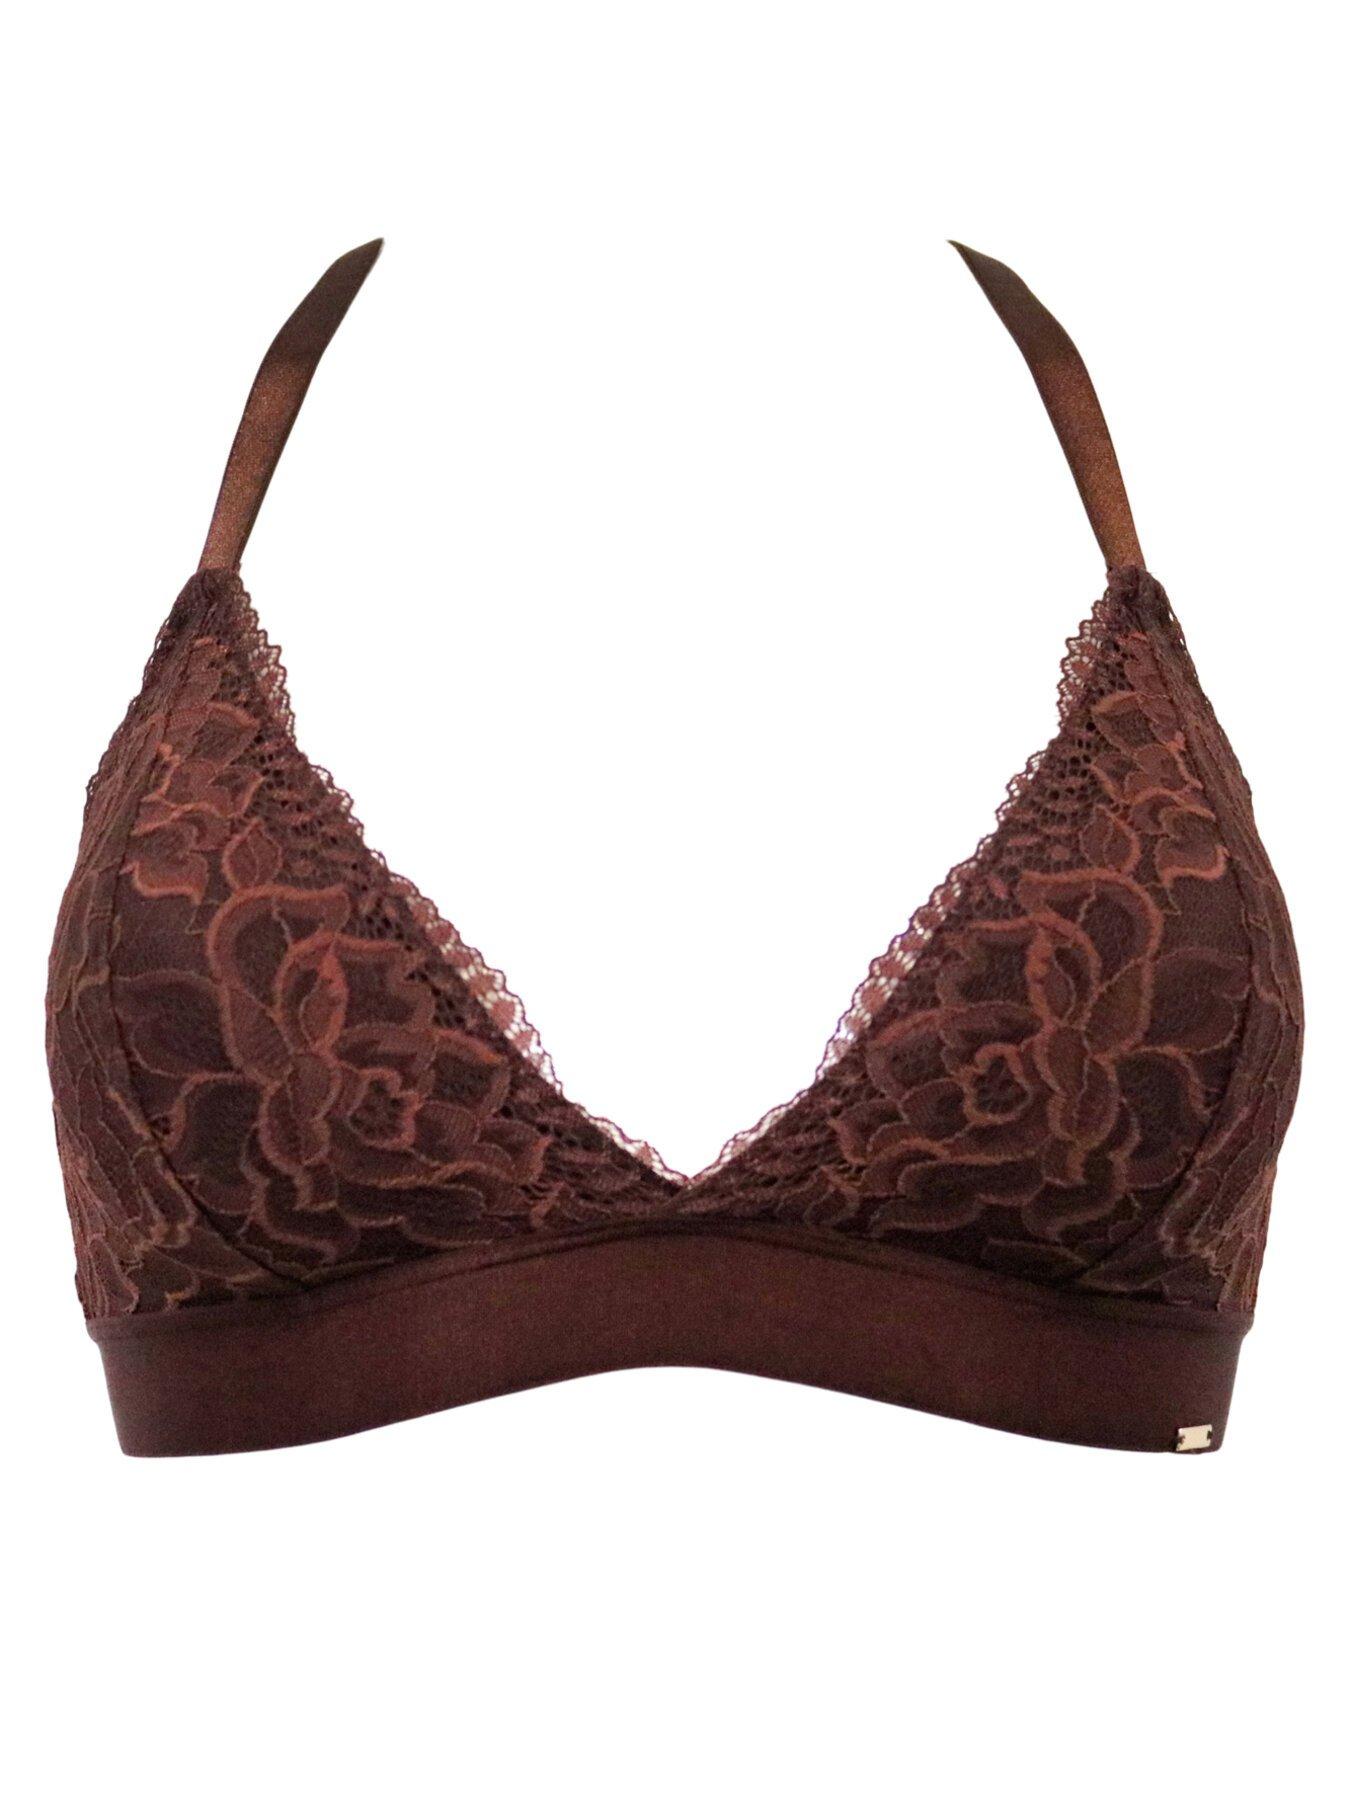 India Removable Padded Soft Triangle Bra - Brown